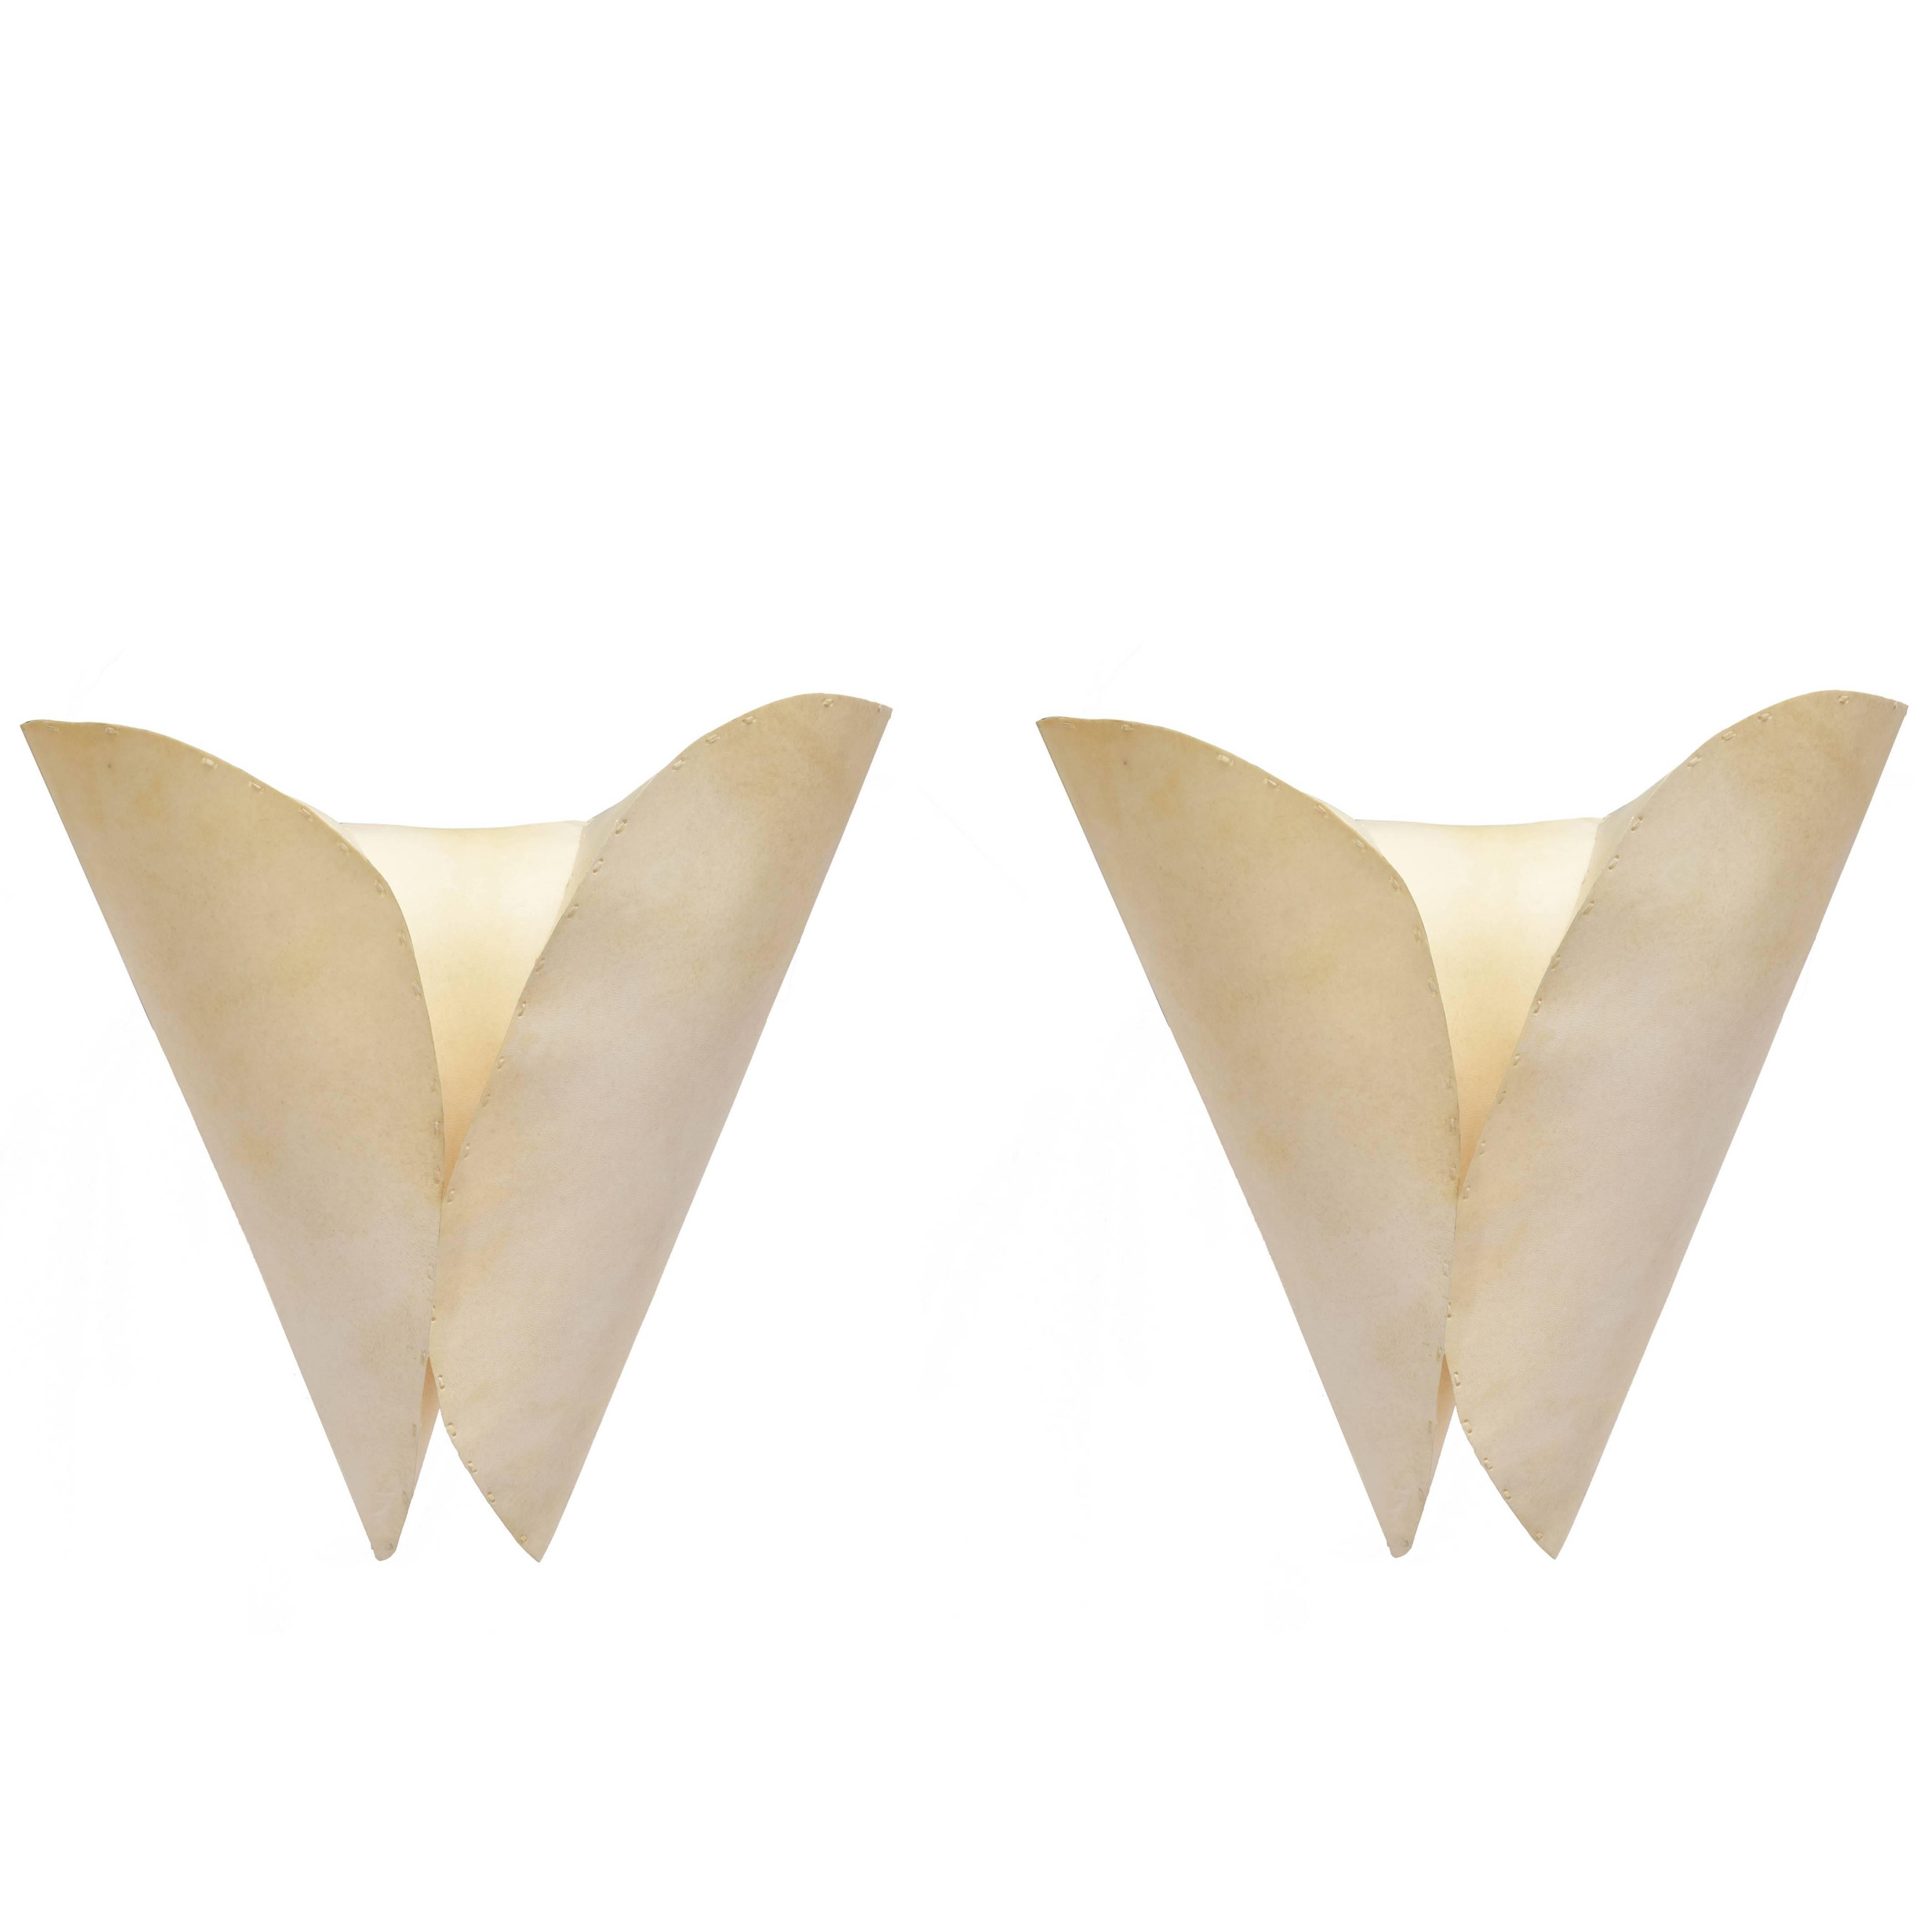 Mauro Fabbro “Gstaad” Pair of Wall Lamps For Sale